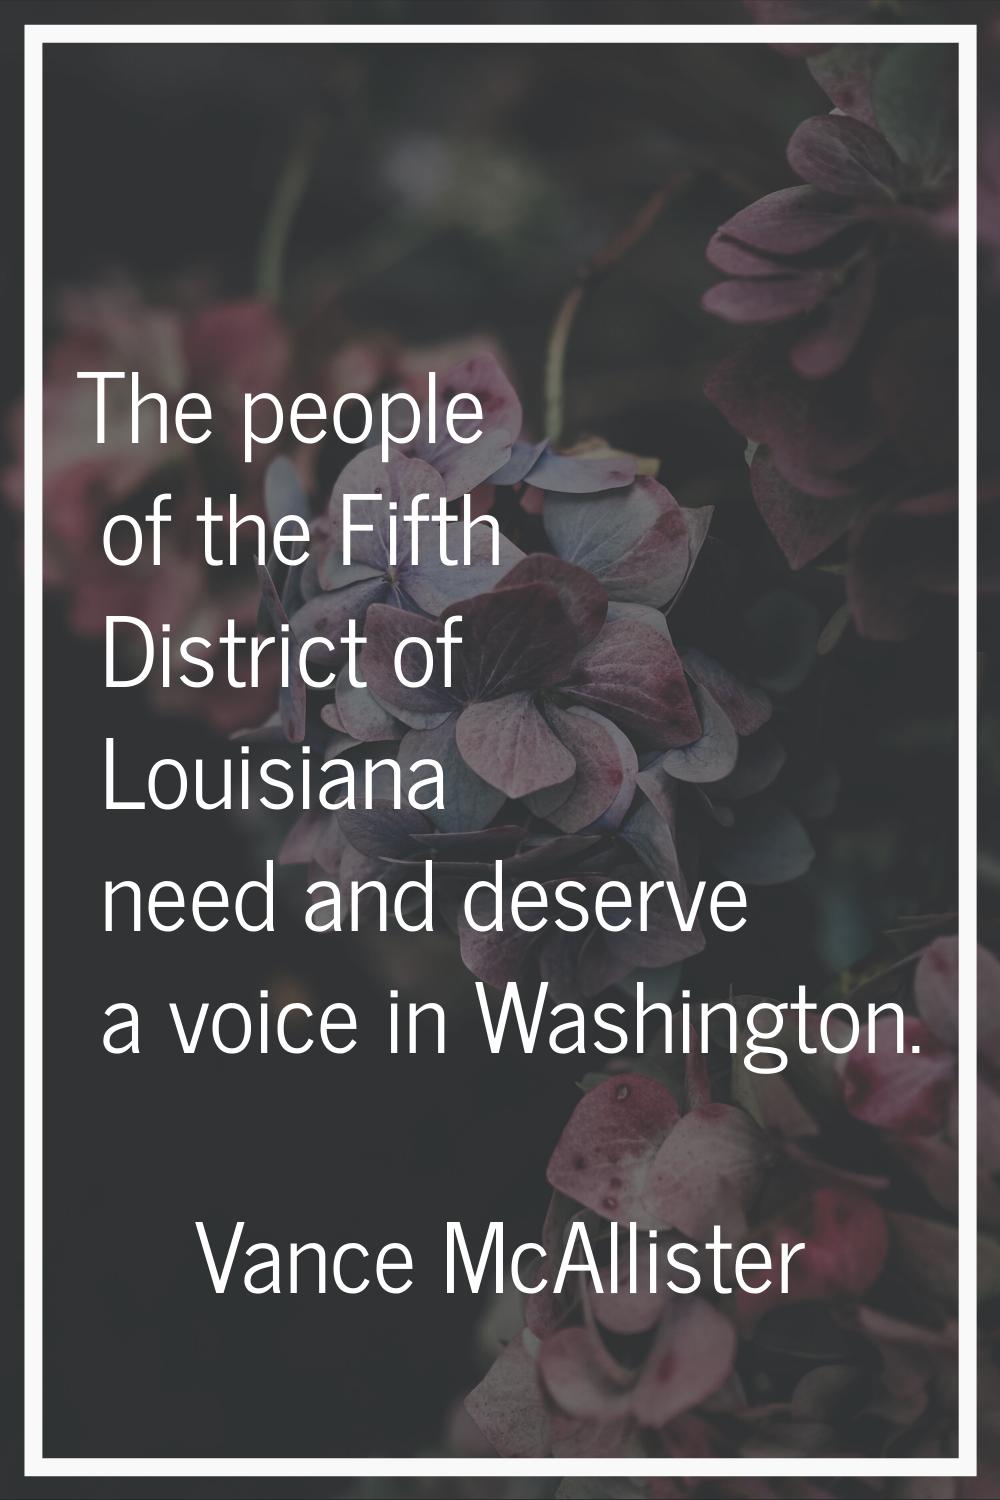 The people of the Fifth District of Louisiana need and deserve a voice in Washington.